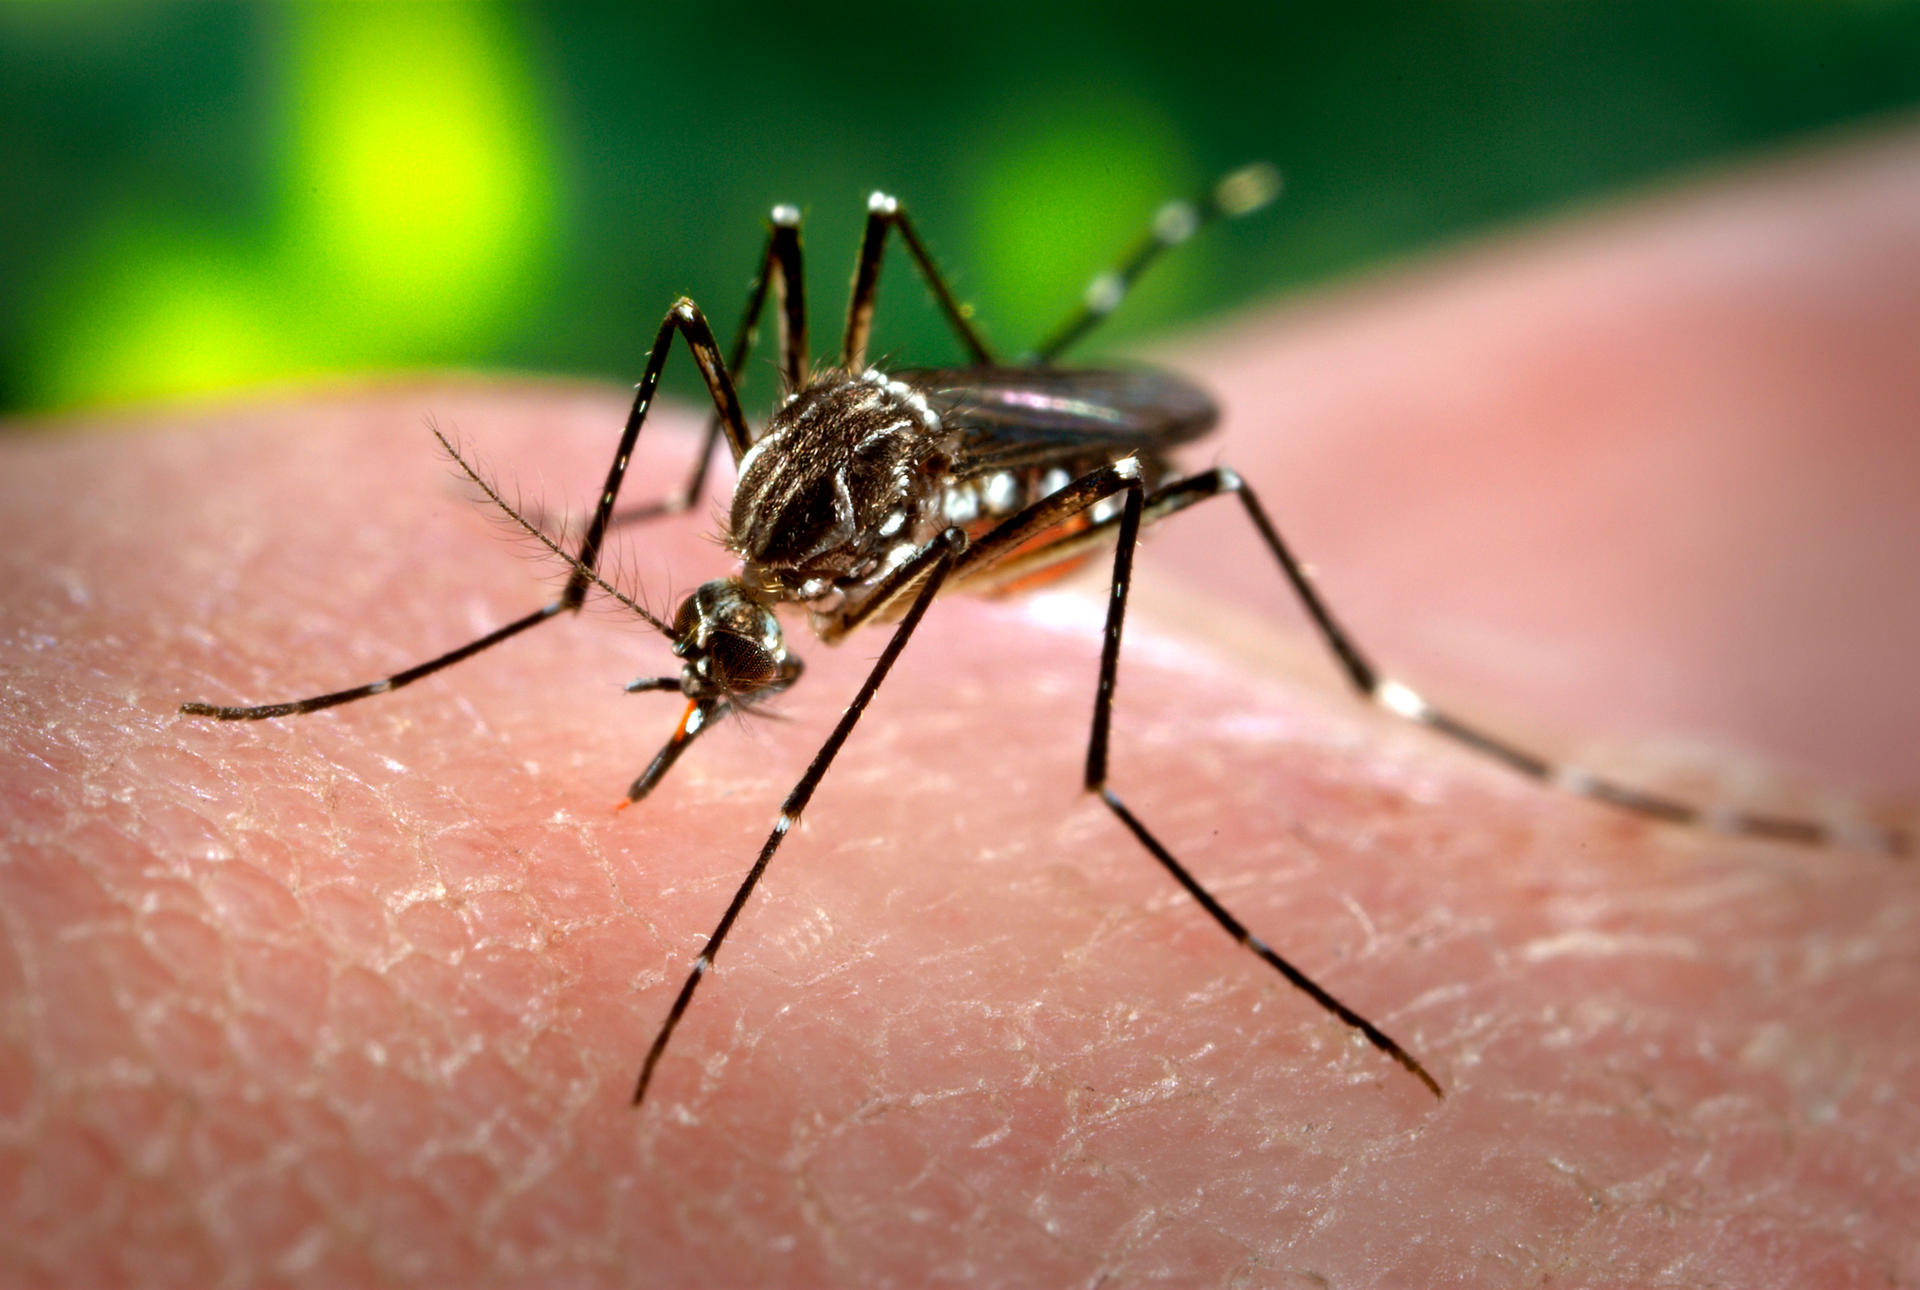 The Aedes aegypti mosquito is the main carrier of the dengue virus. 